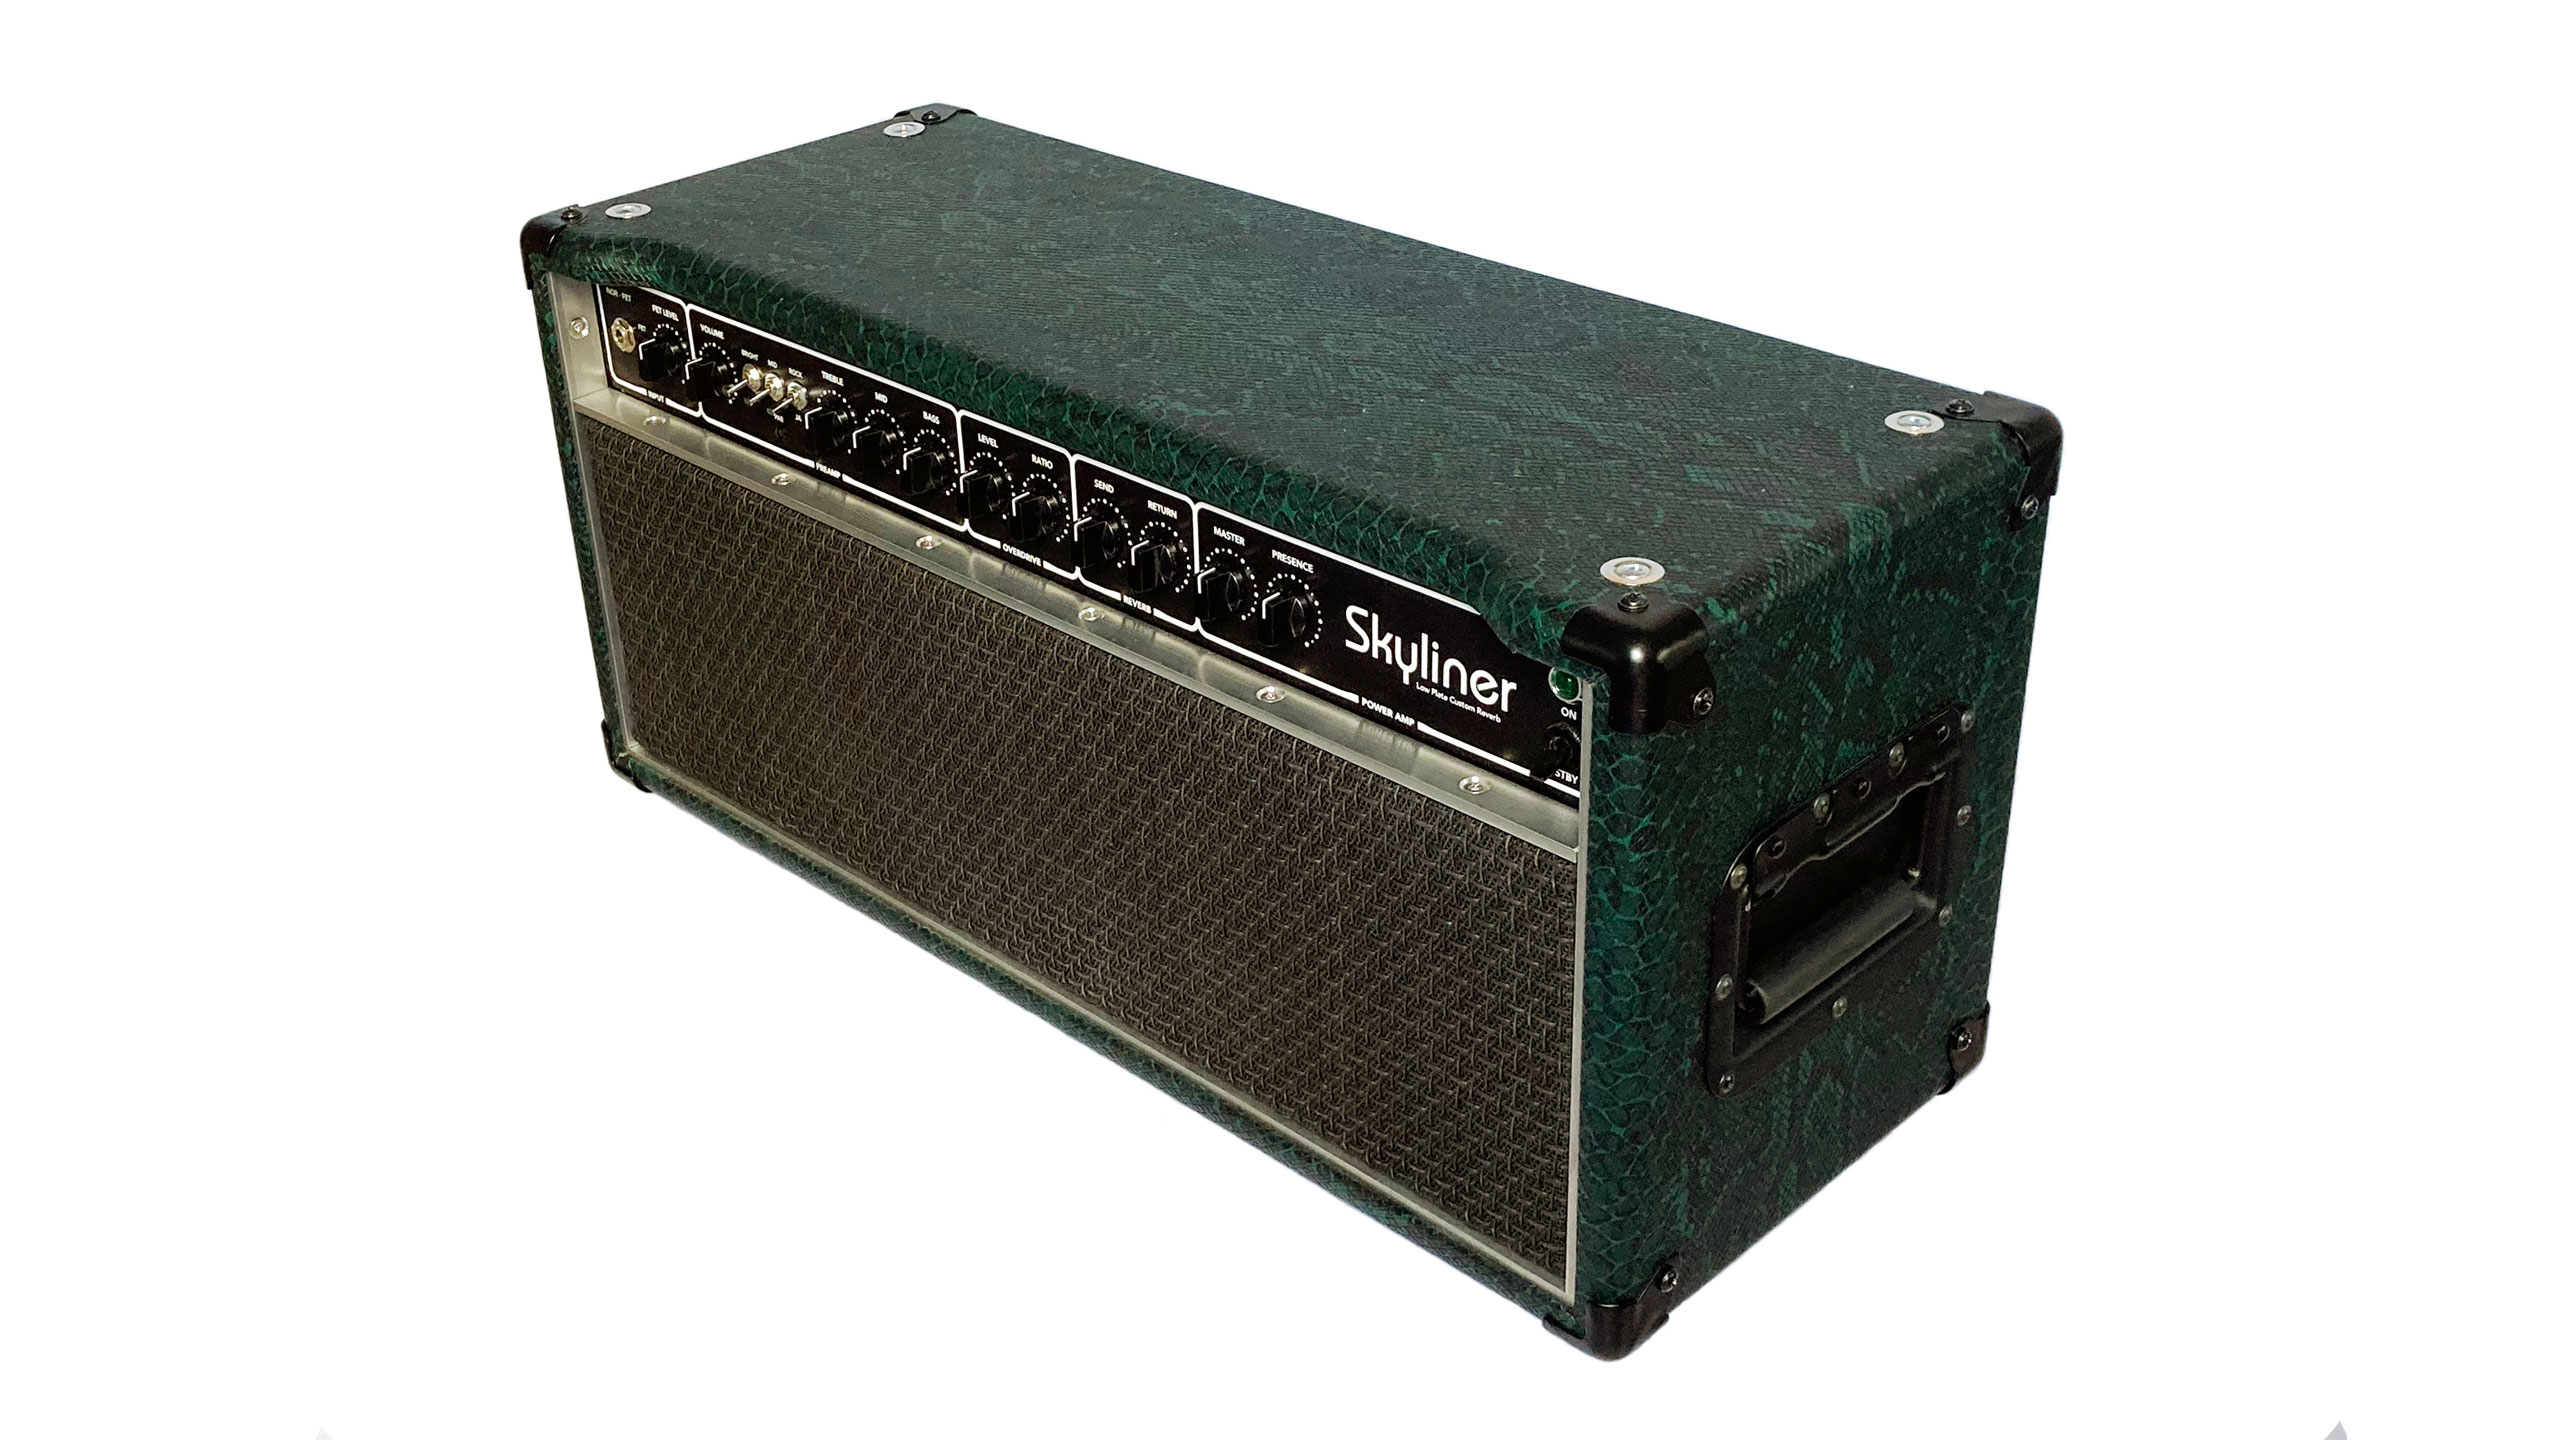 Skyliner guitar amp - right front high